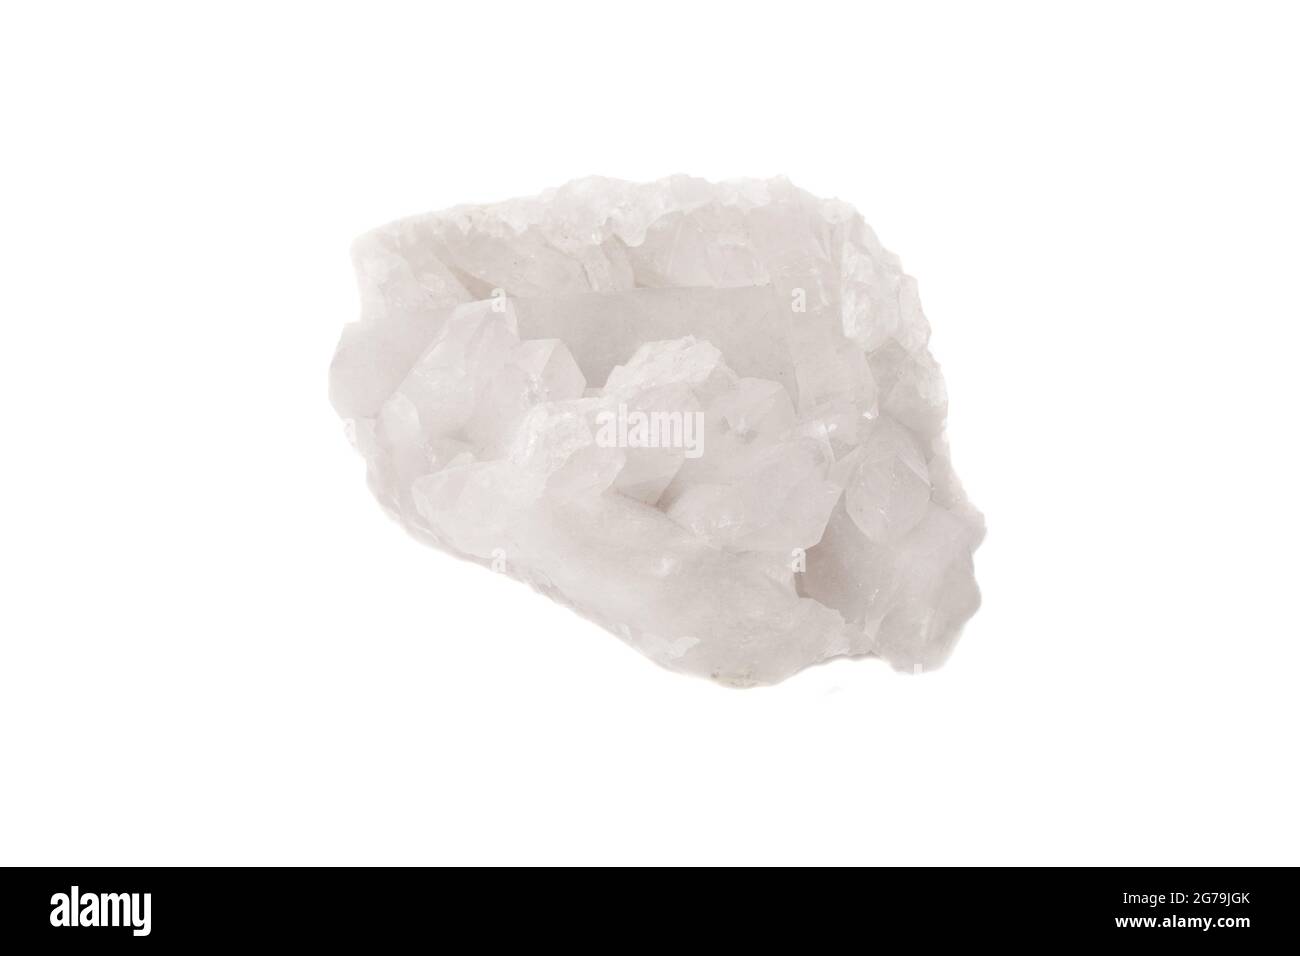 A clear quartz cluster rock photographed against a white background Stock Photo